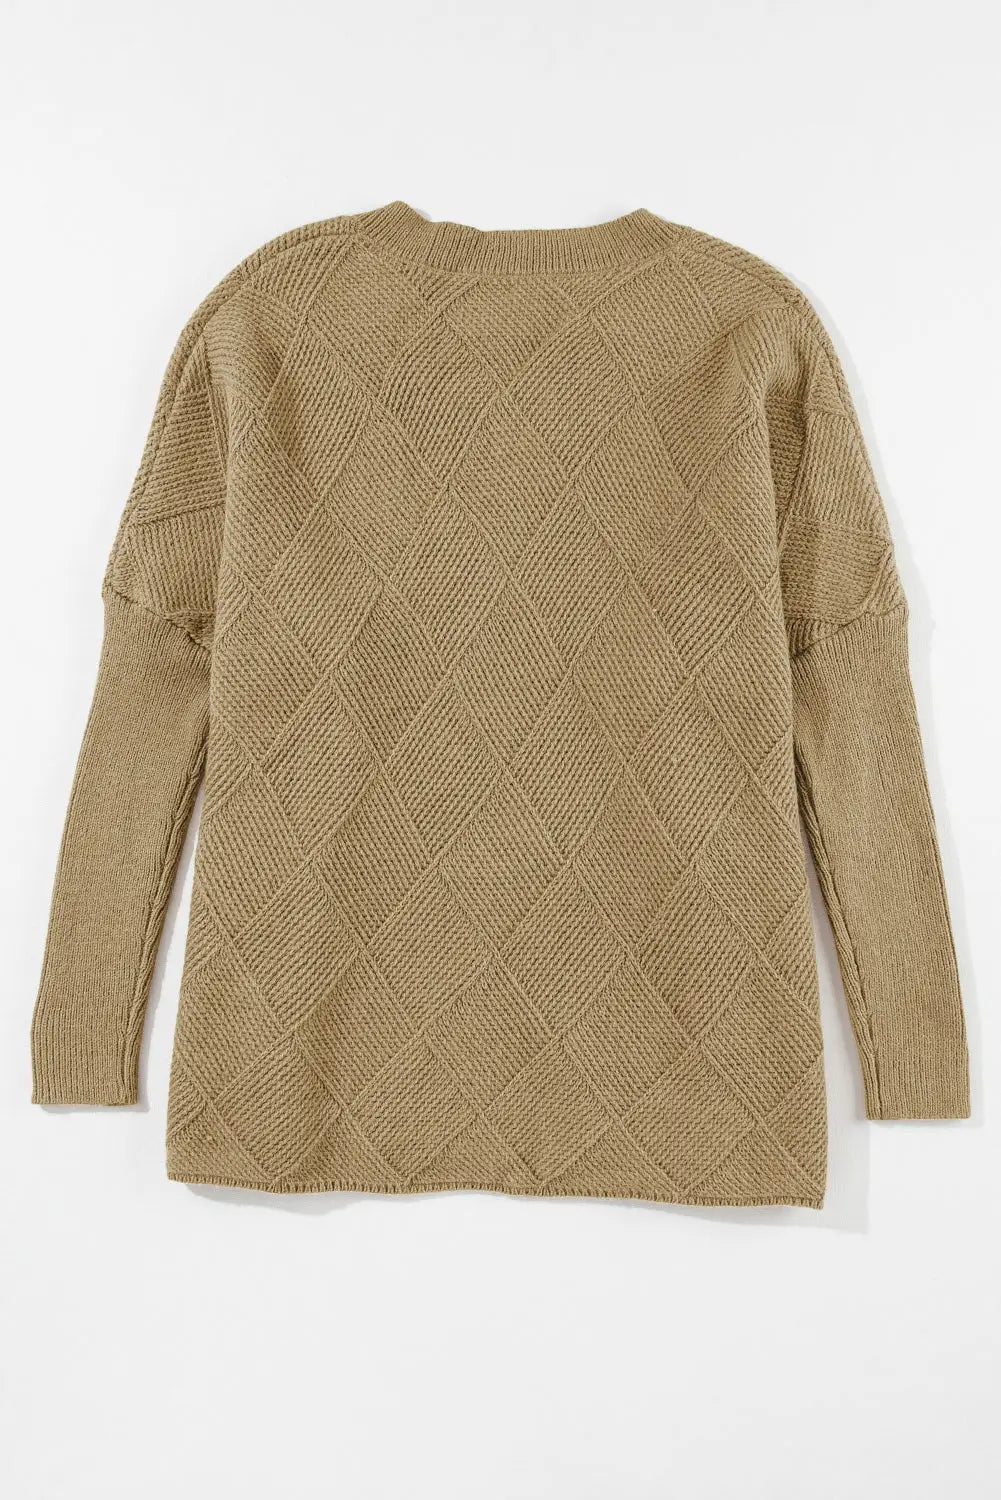 Camel checkered textured batwing sleeve sweater - sweaters & cardigans